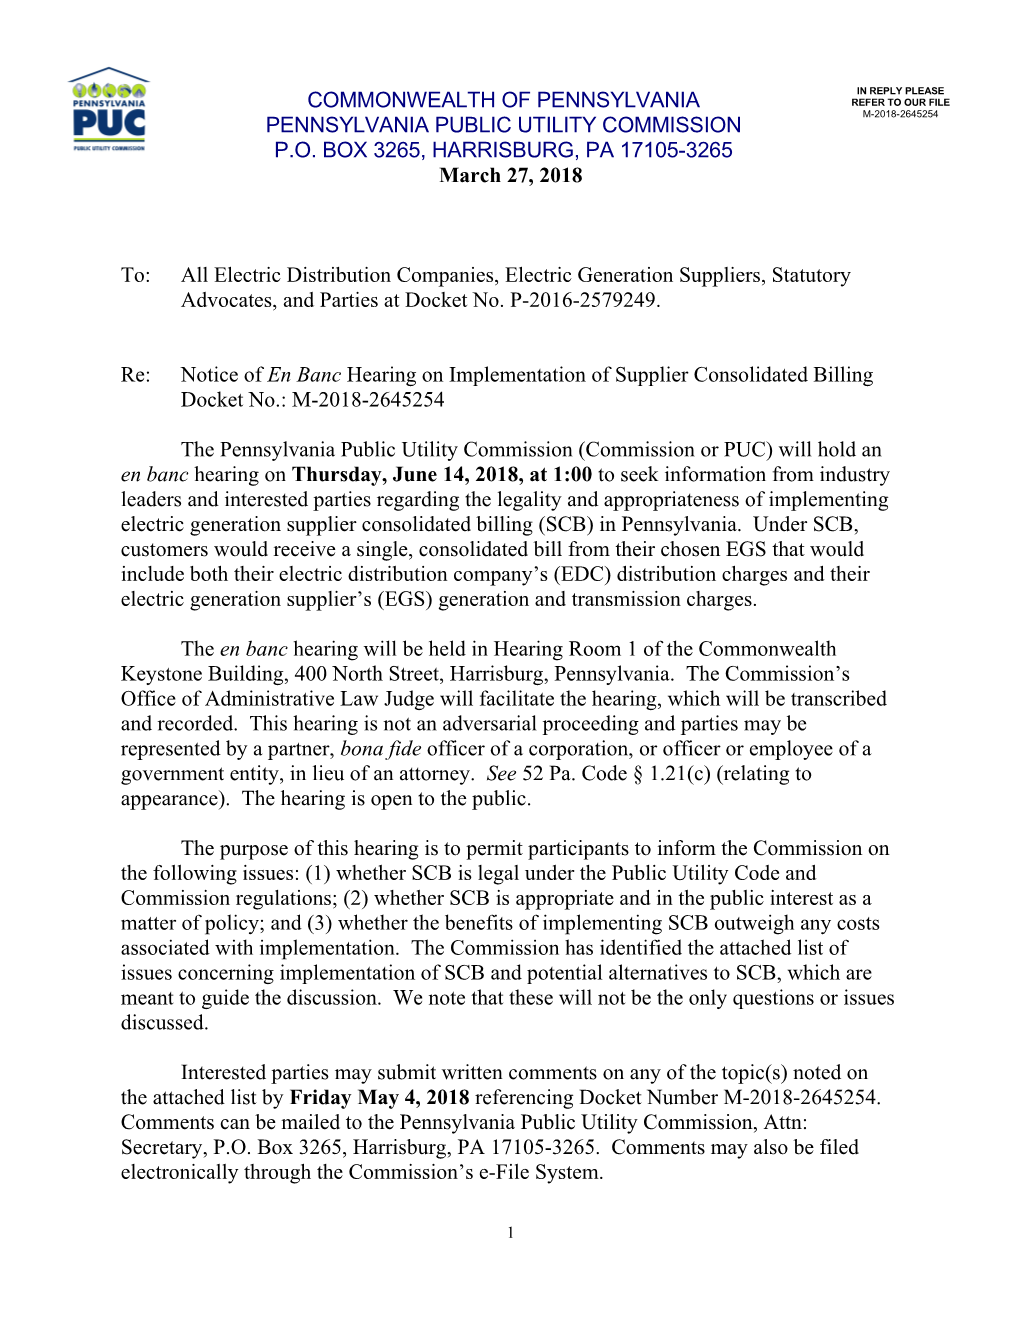 Re:Notice of En Banc Hearing on Implementation of Supplier Consolidated Billing